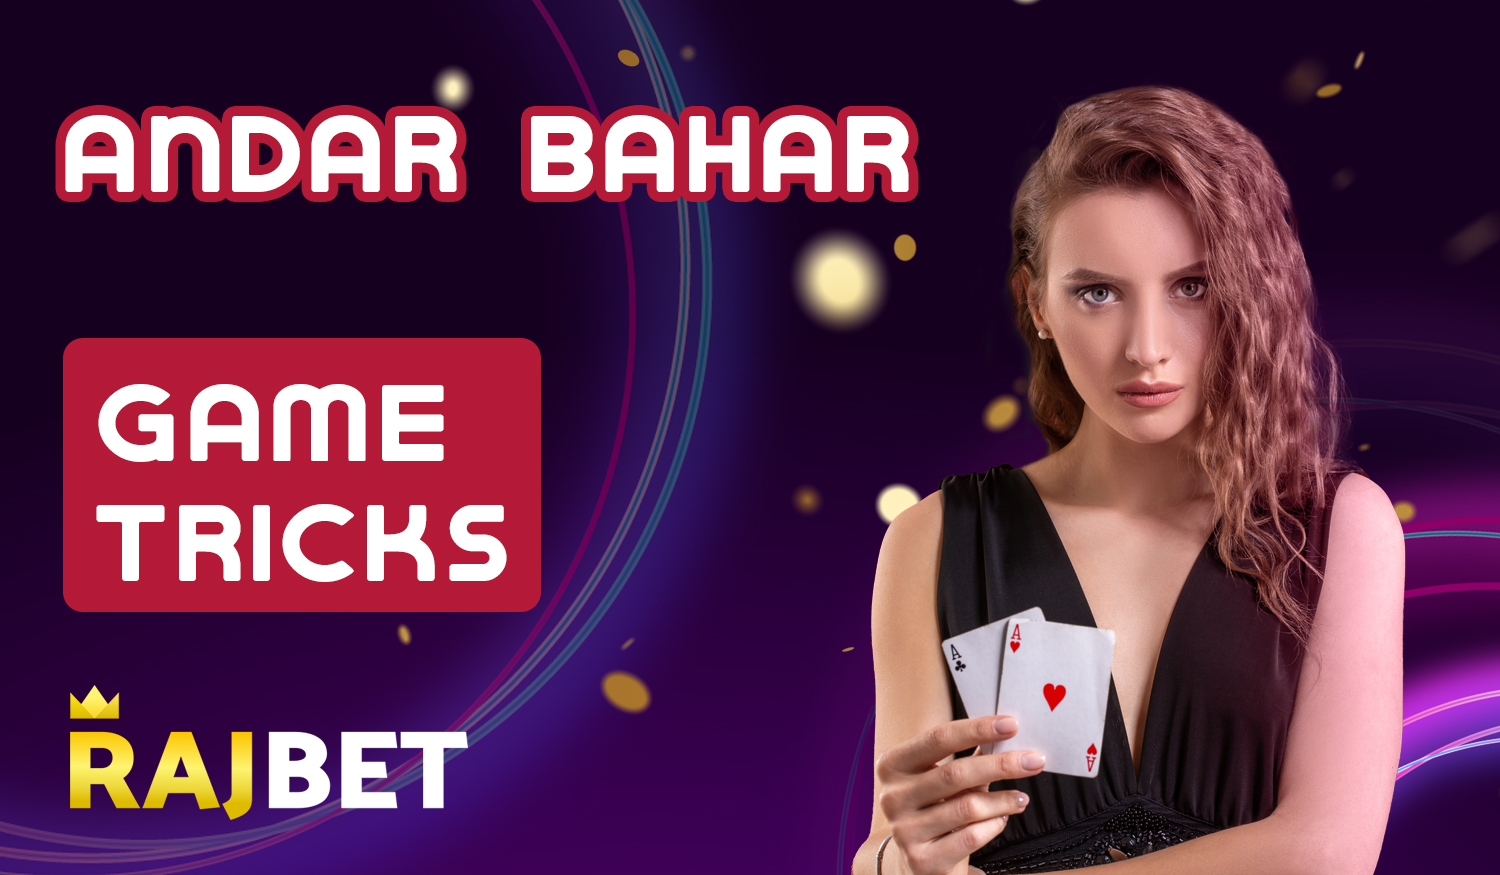 Some useful tips on how to successfully play Andar Bahar at Rajbet